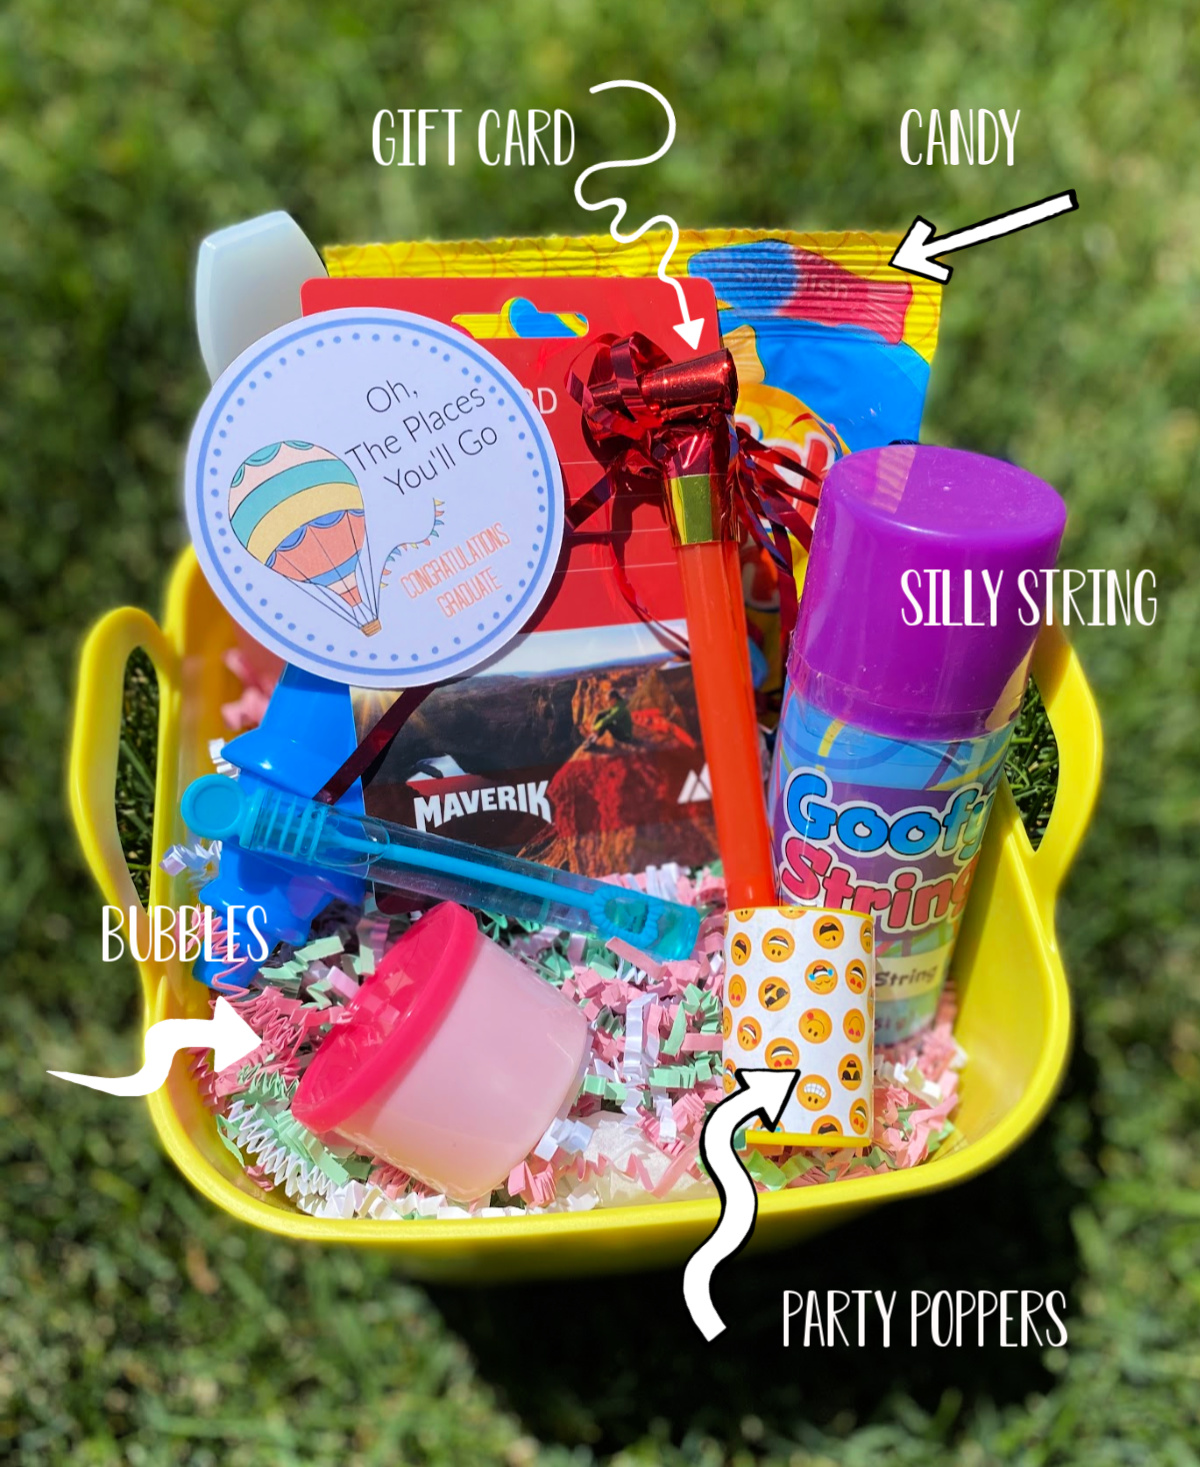 Senior Graduation Gifts for Her - Oh My Creative